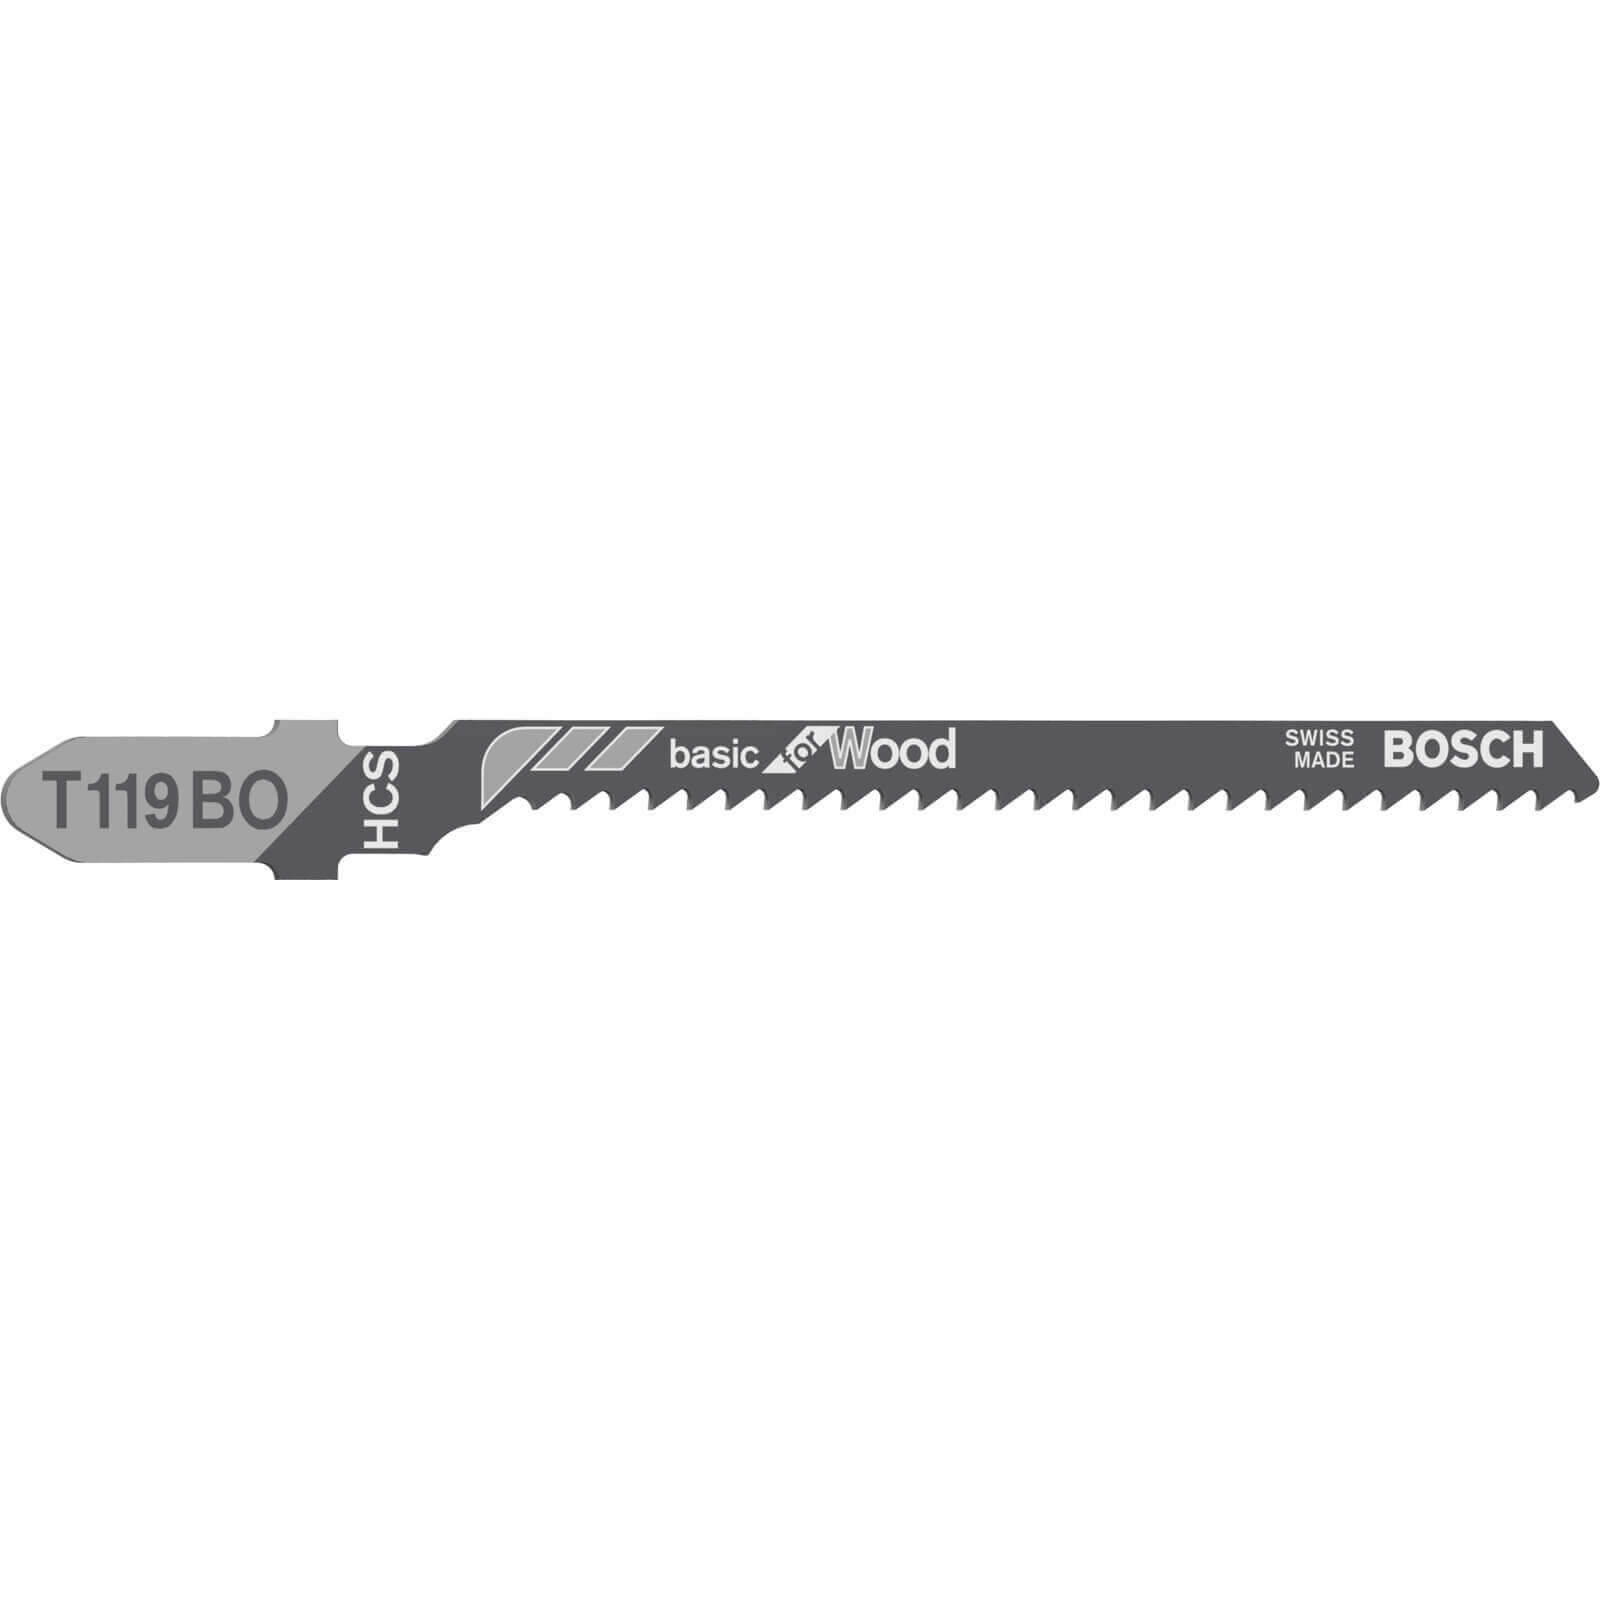 Image of Bosch T119 BO Wood Cutting Jigsaw Blades Pack of 3